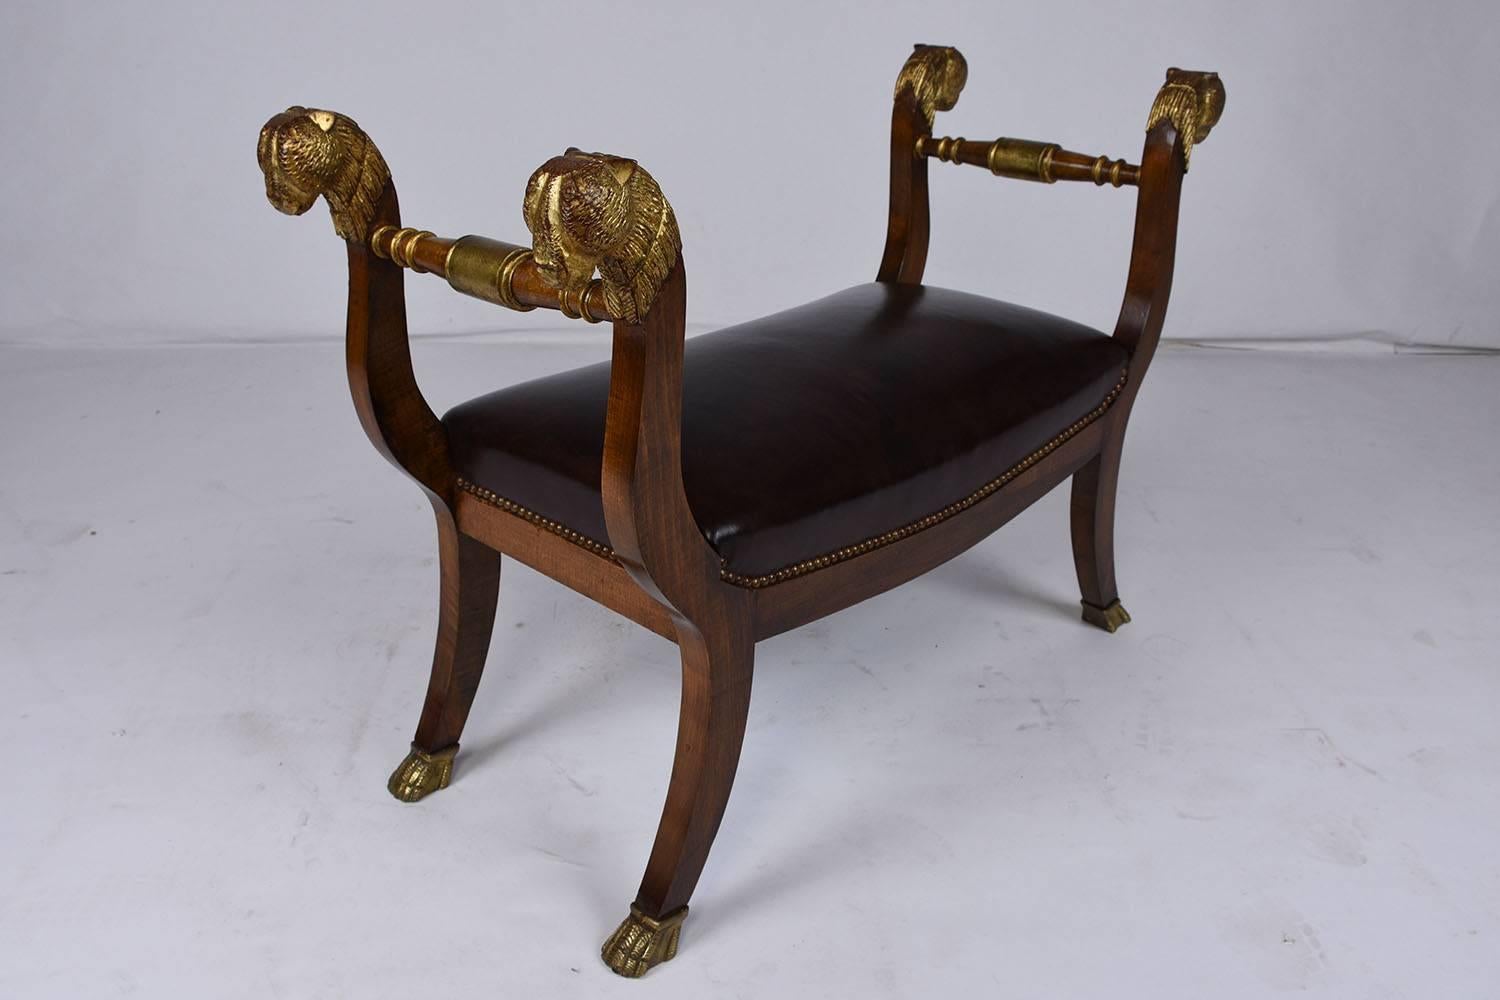 This 1900s antique French Empire-style bench features a frame made from mahogany wood in a beautiful rich stain finish. The frame is serpentine shaped with carved gilt details on the top of the handles of cat-esque figurine heads and finished with